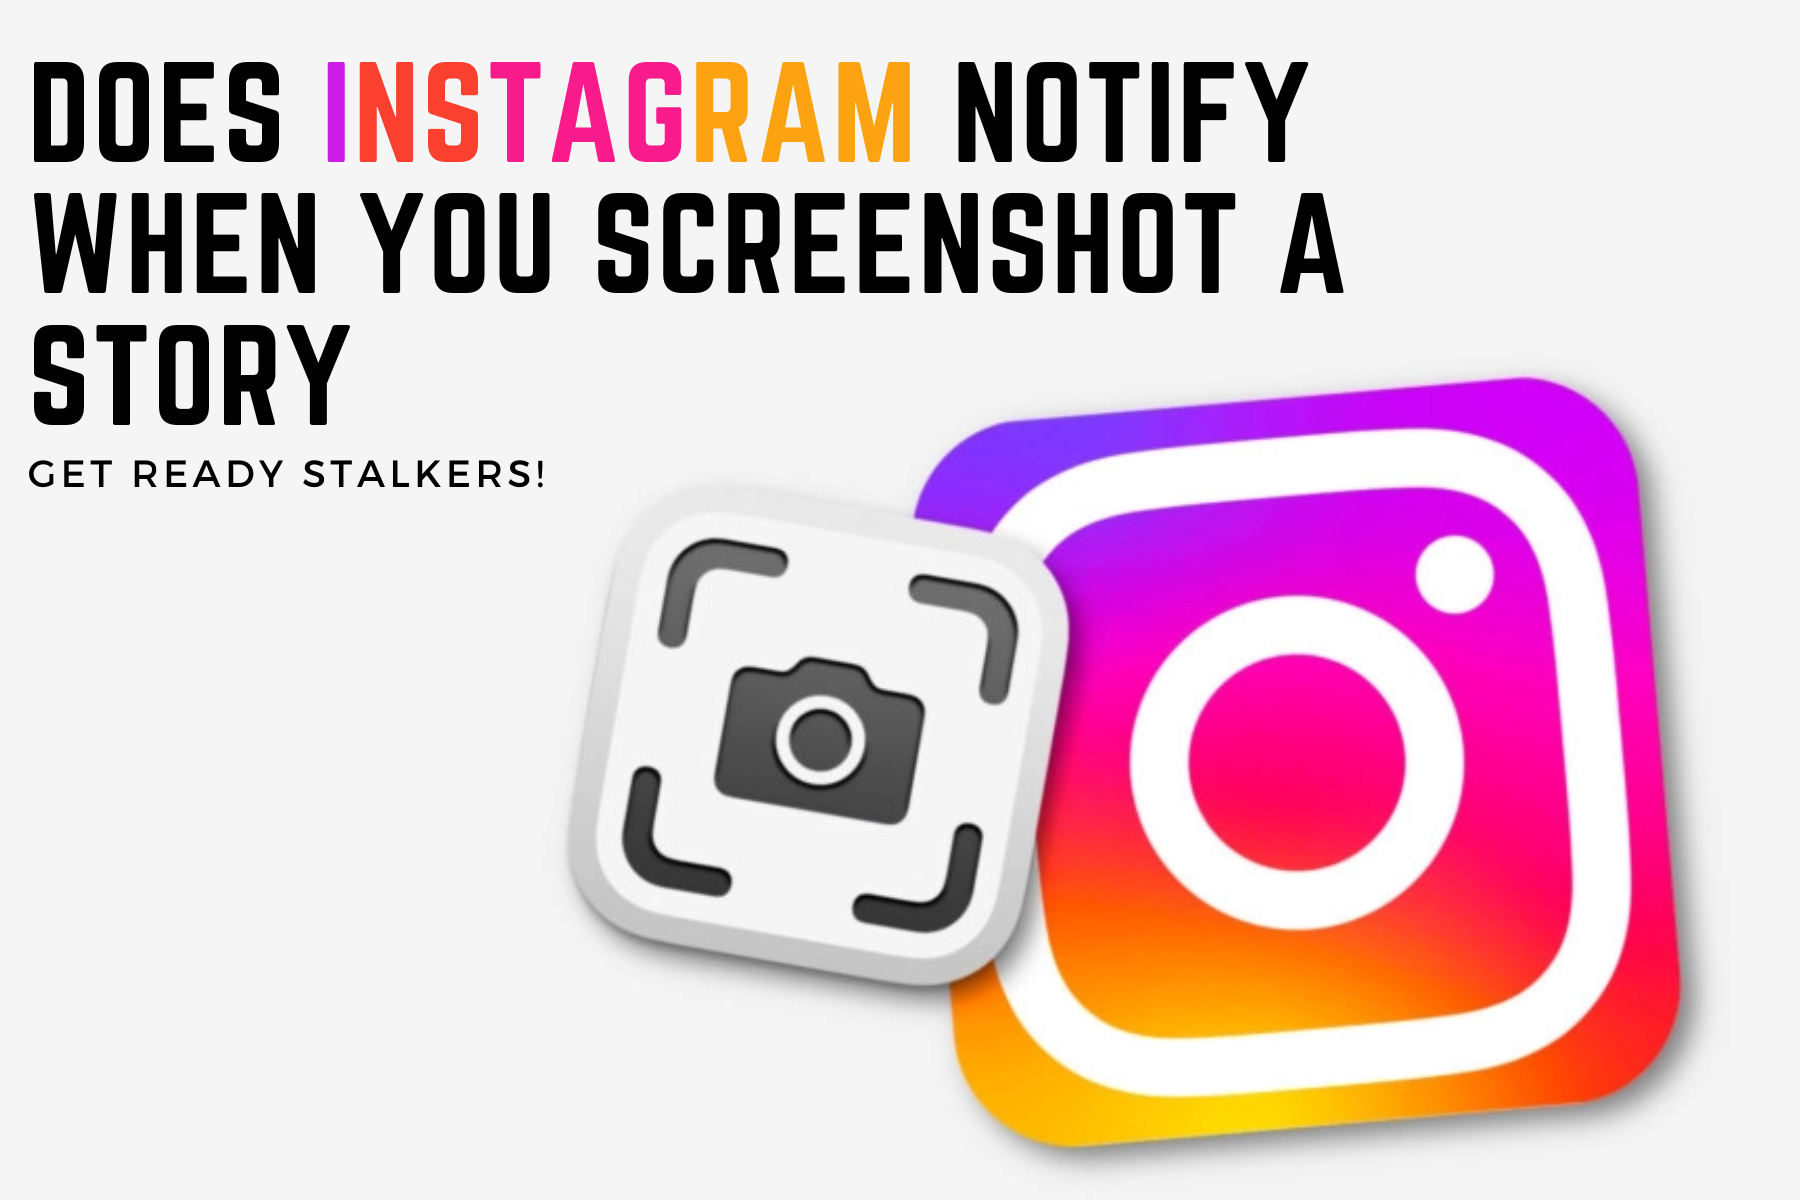 Does Instagram Notify When You Screenshot A Story - Get Ready Stalkers!